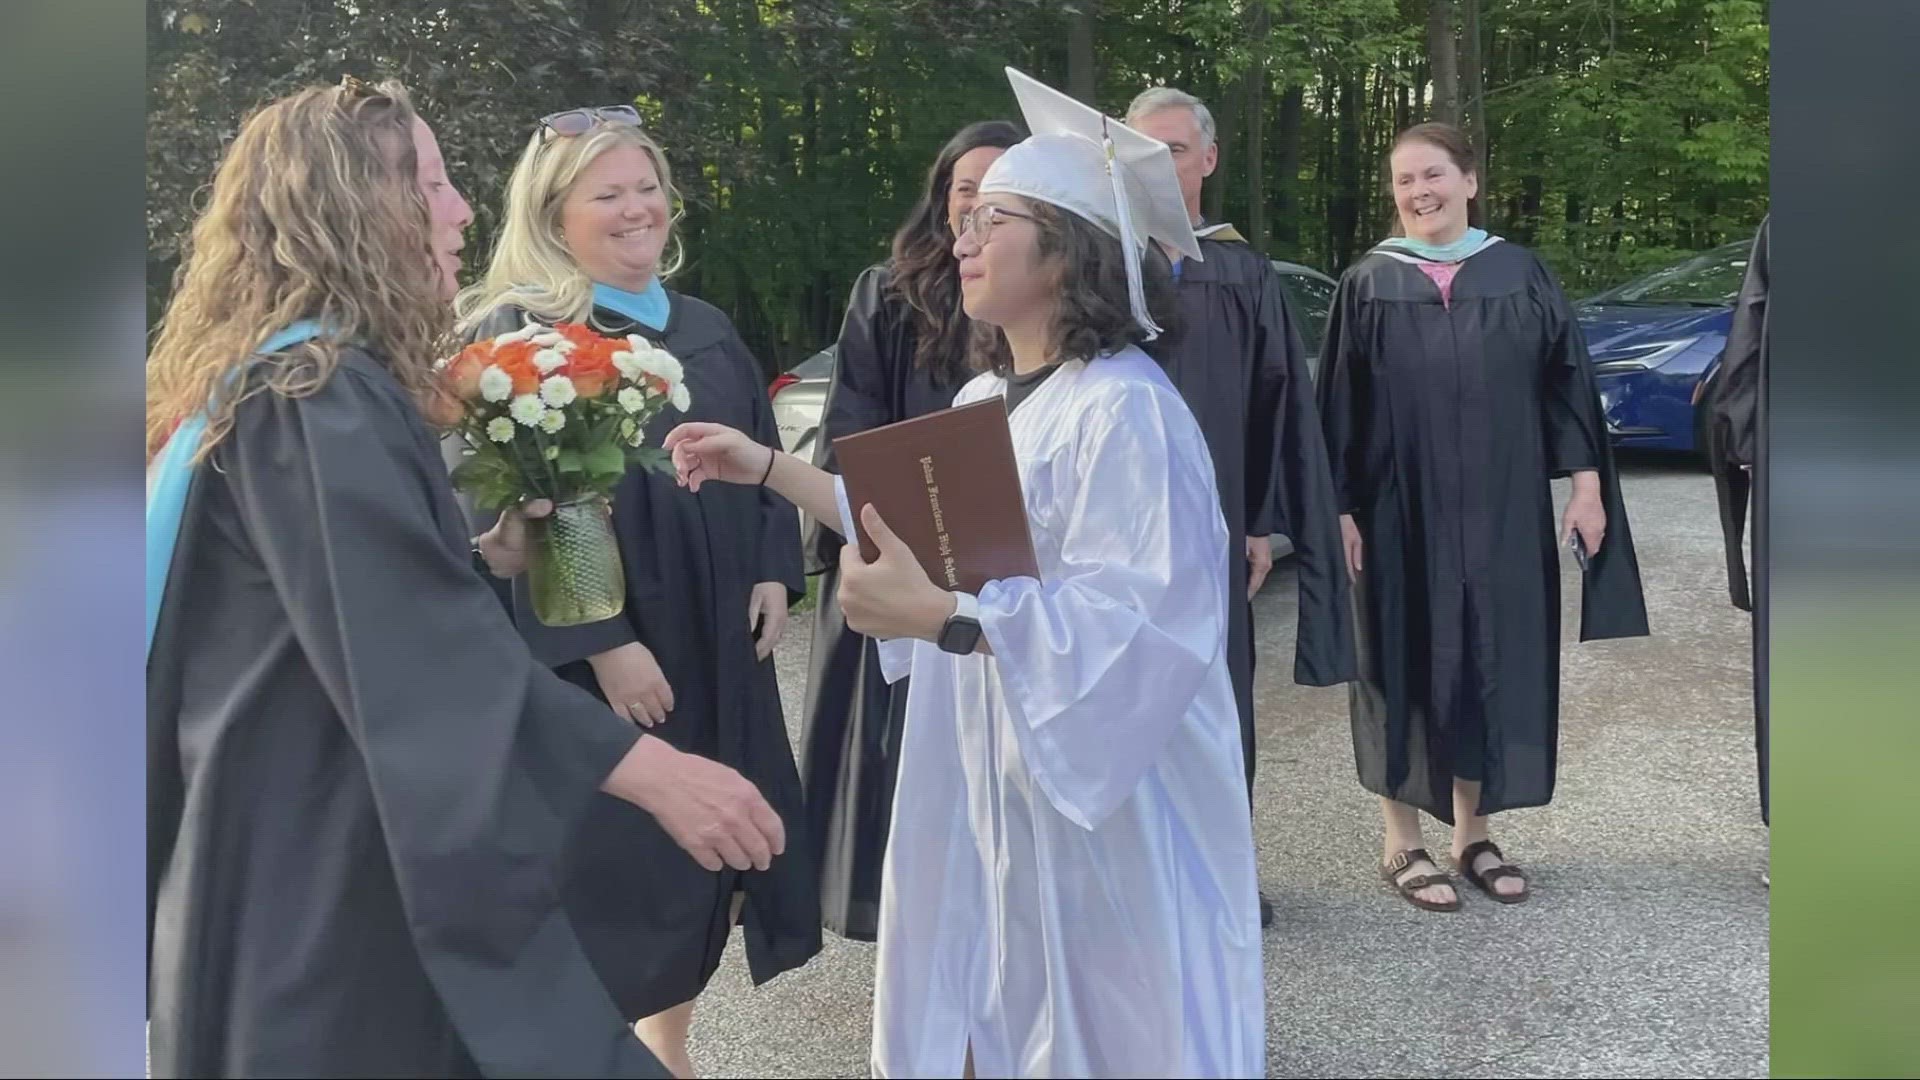 When a student came down with the flu and missed her graduation ceremony, Padua High School made sure she was still able to experience graduation.